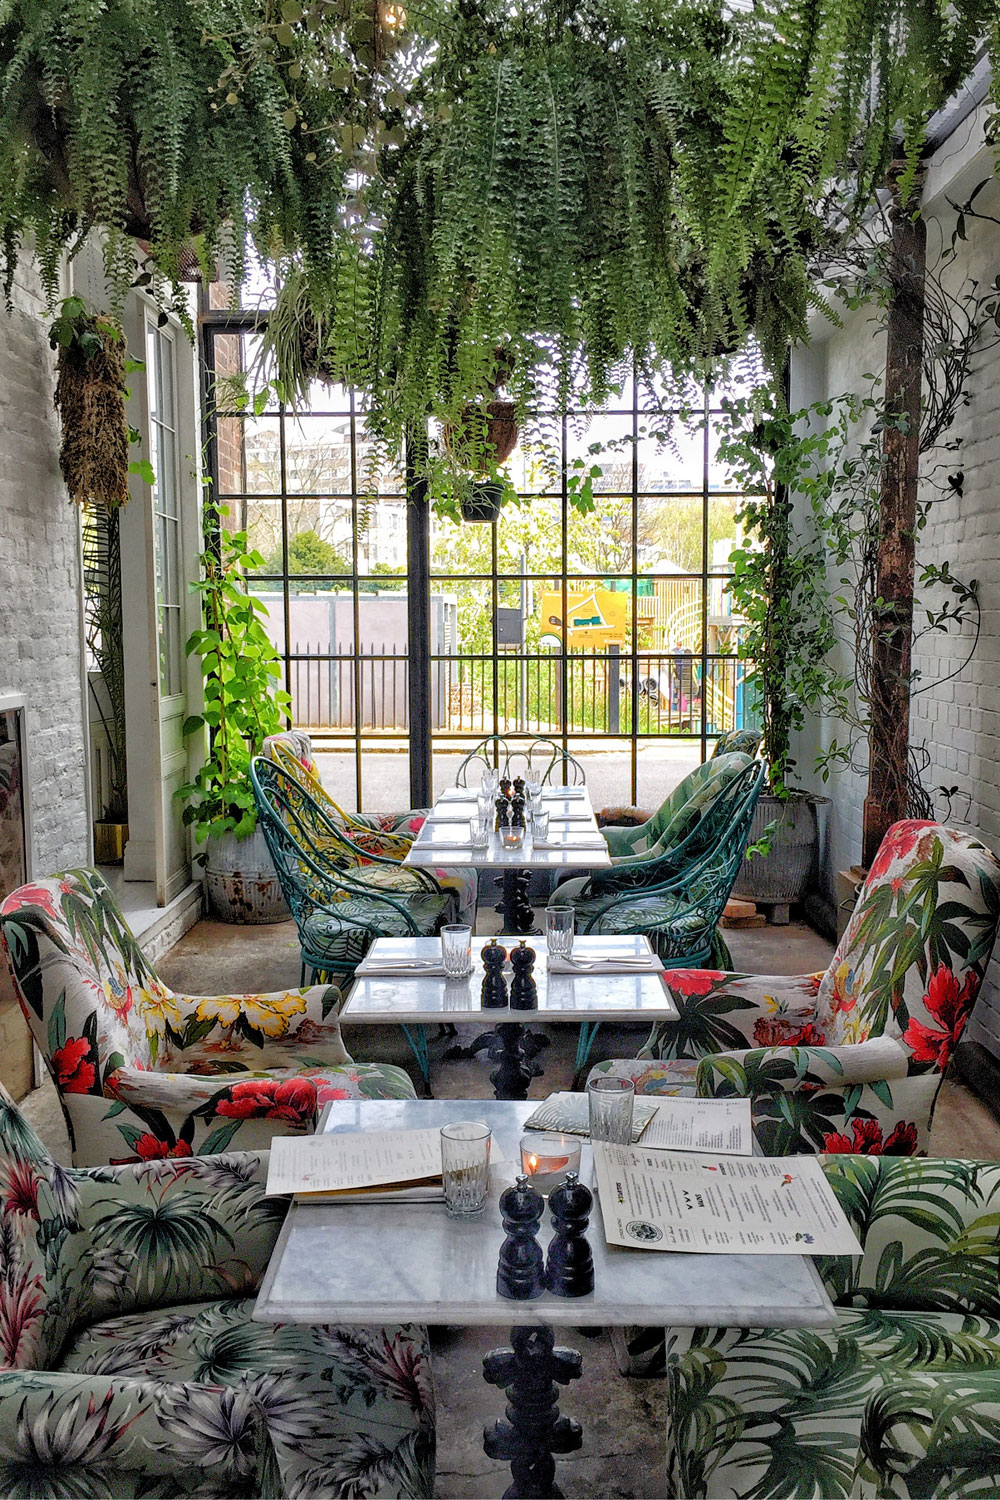 London’s Best Hidden Gems For Special Occasions